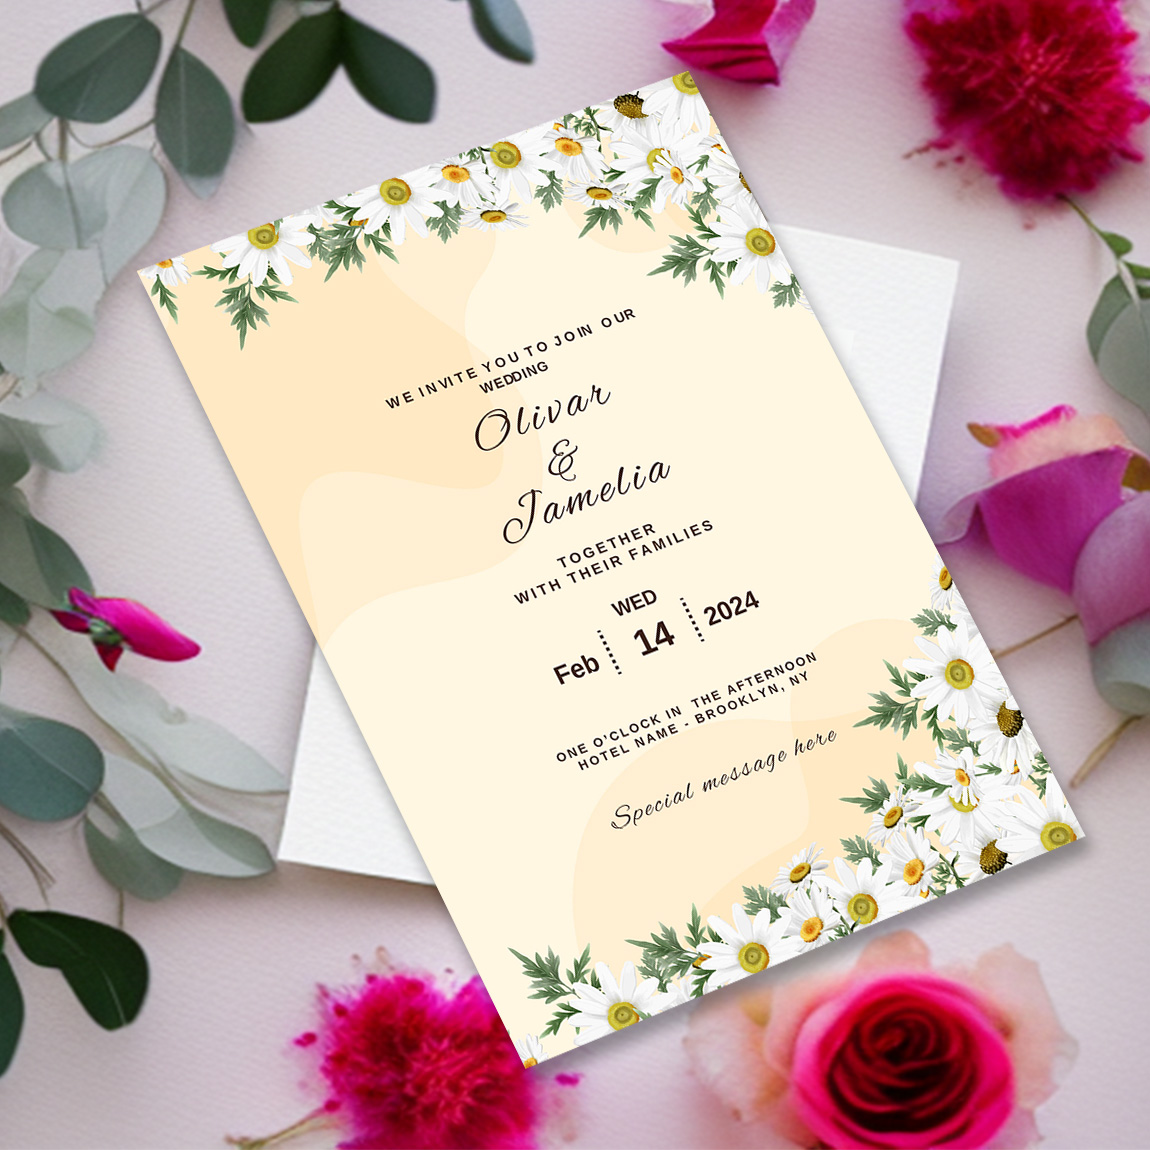 Image with unique wedding invitation card with flowers/